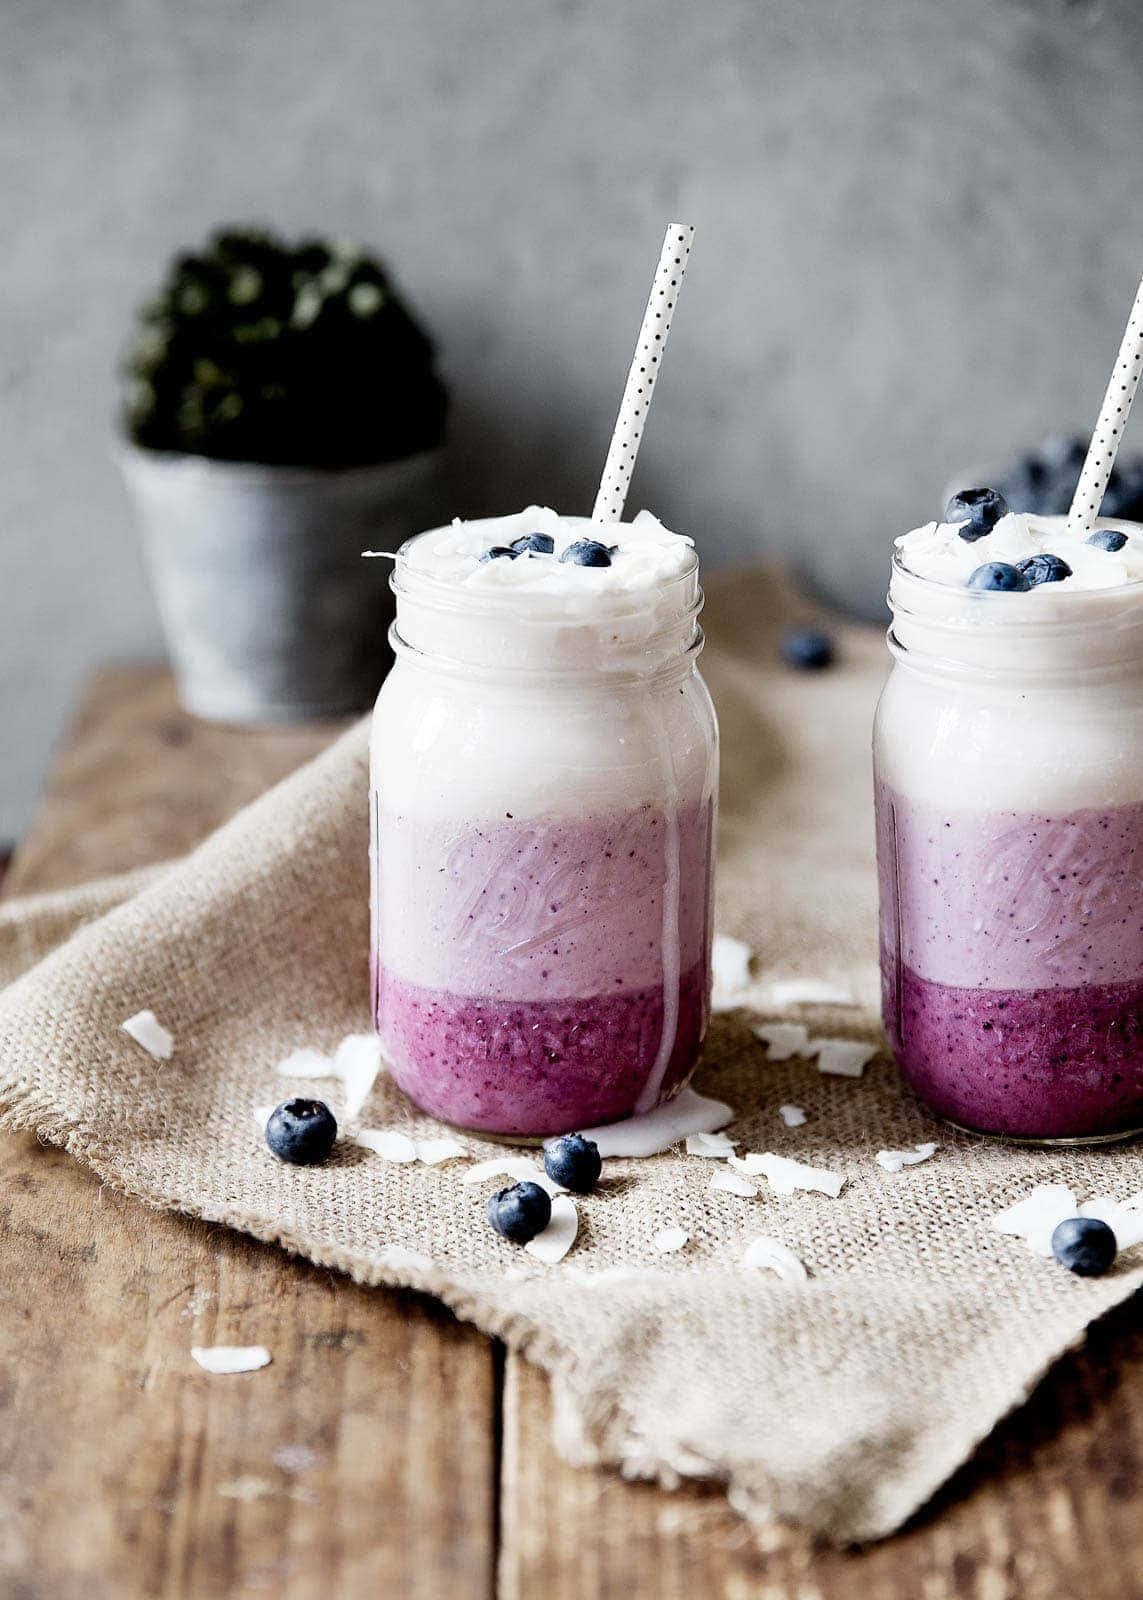 Start your day off right with a delicious, nutrtitious blueberry smoothie! Wallpaper